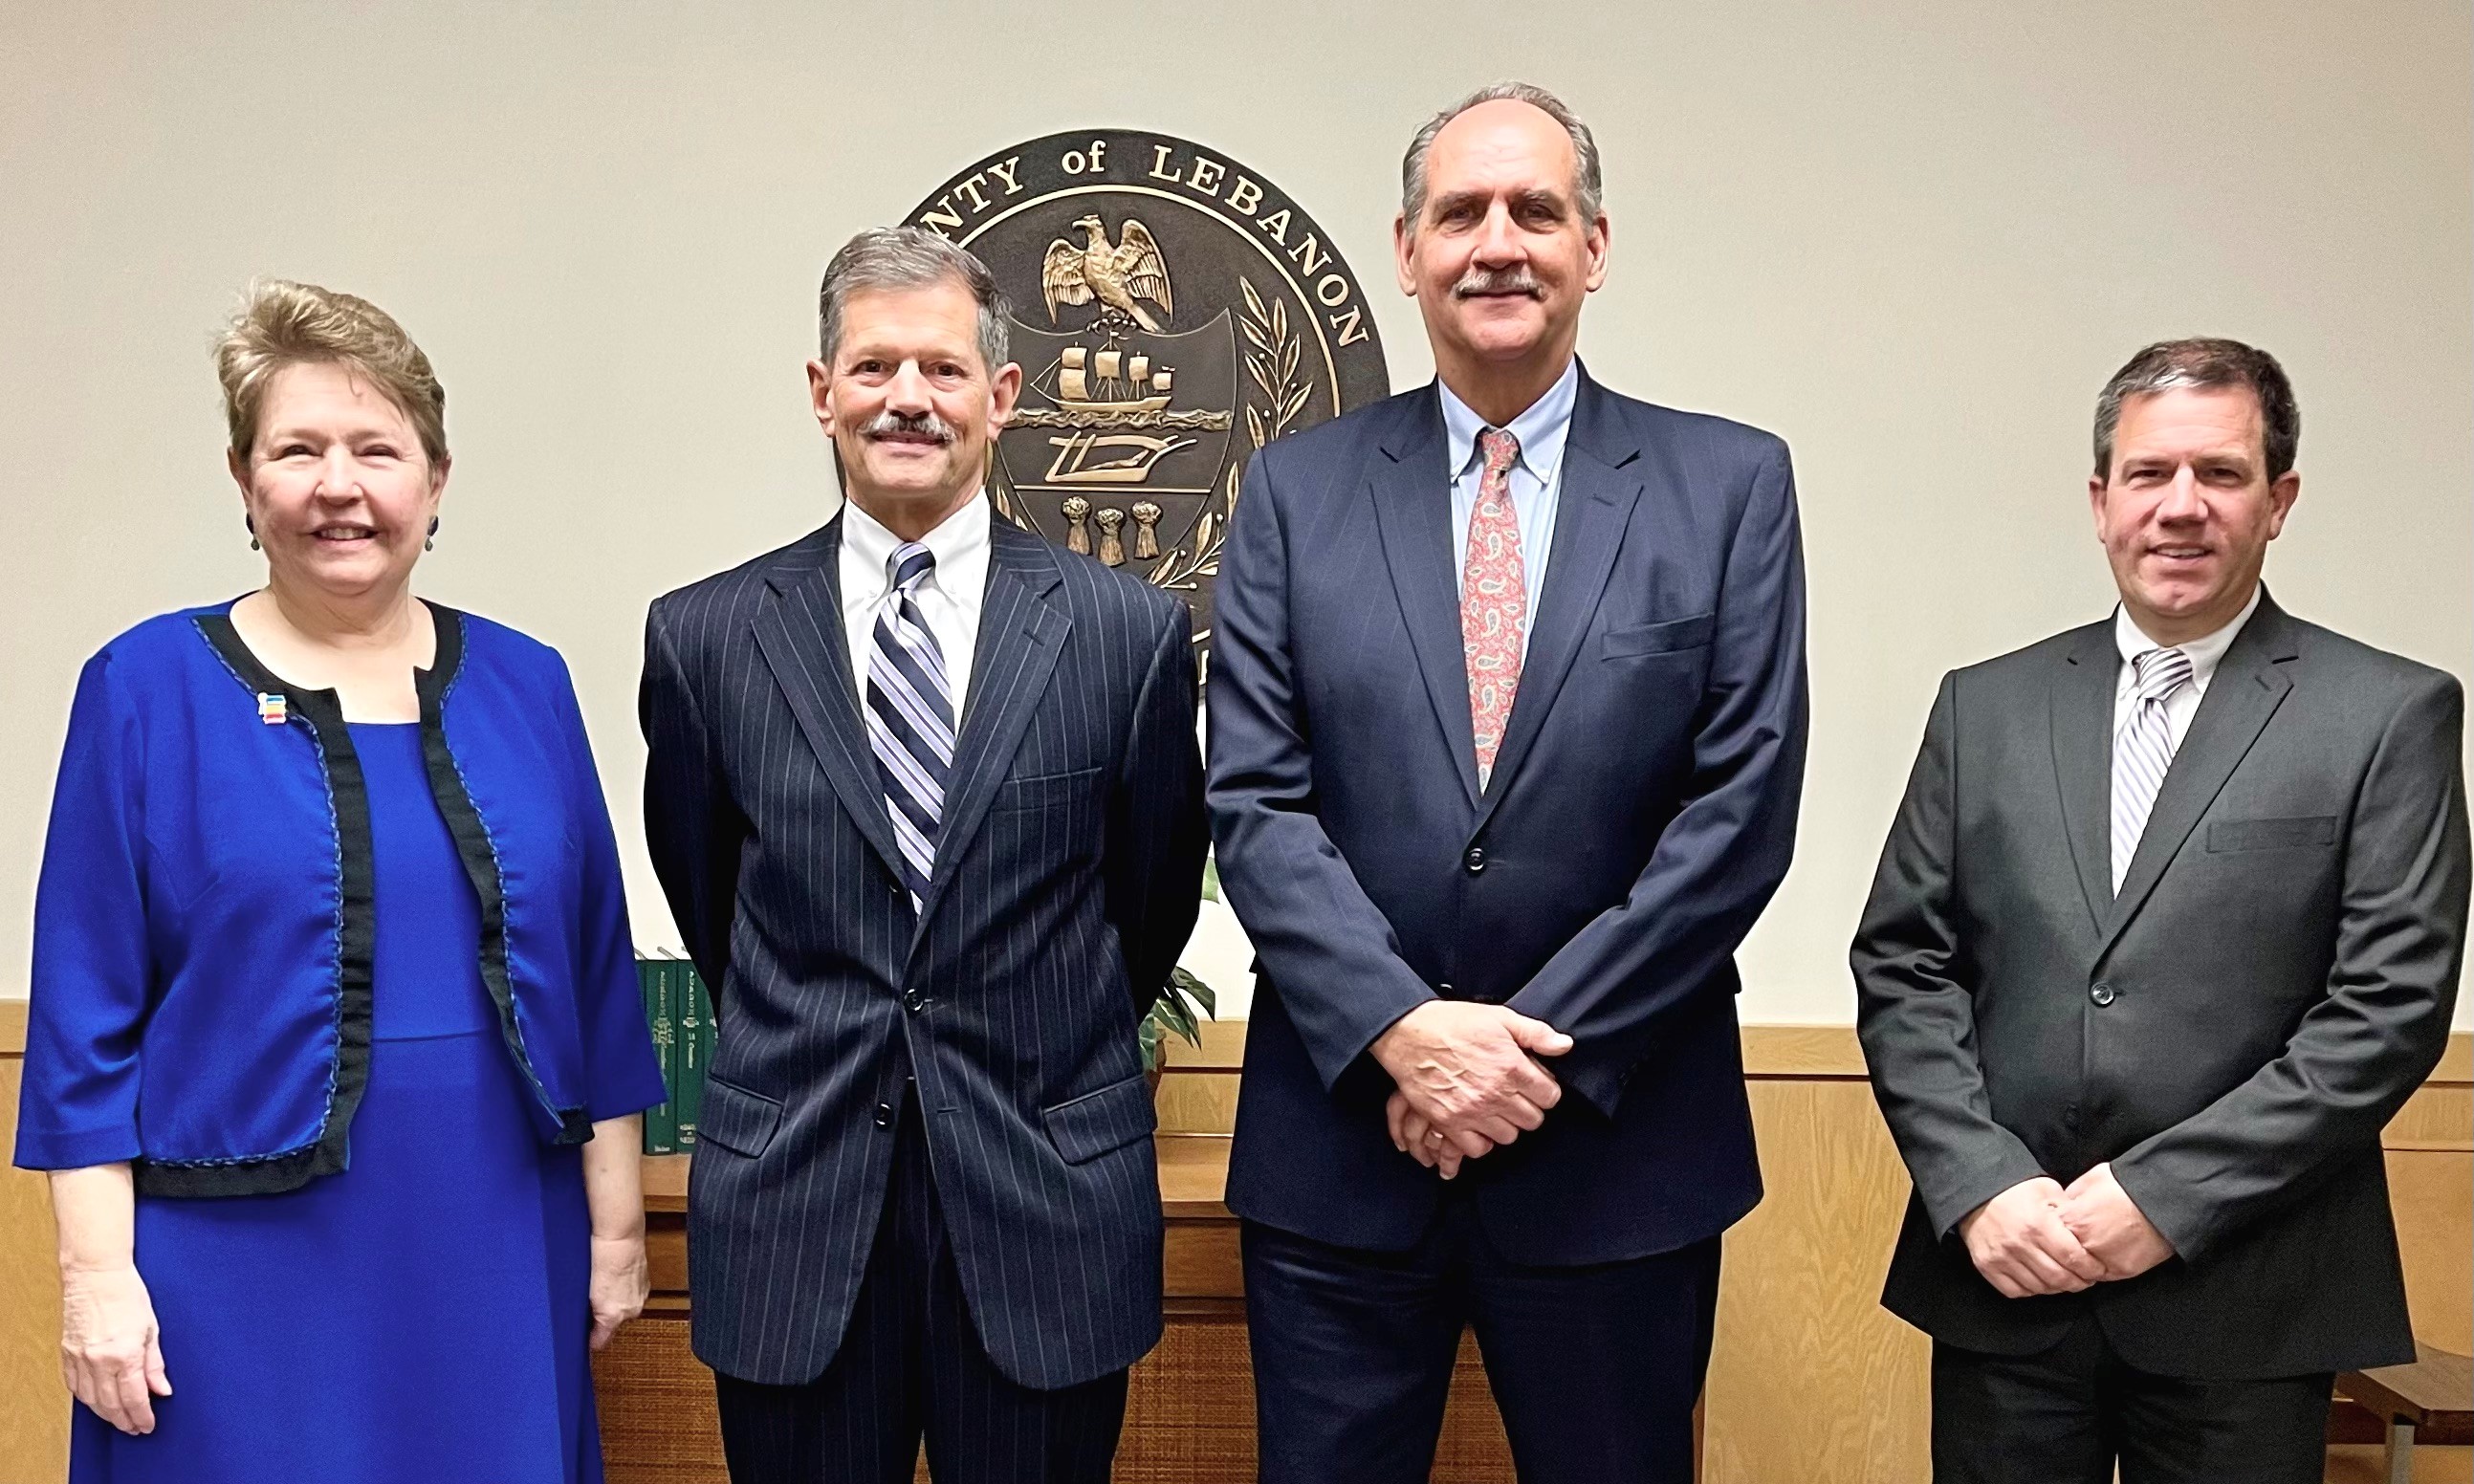 Lebanon County Board of Commissioners